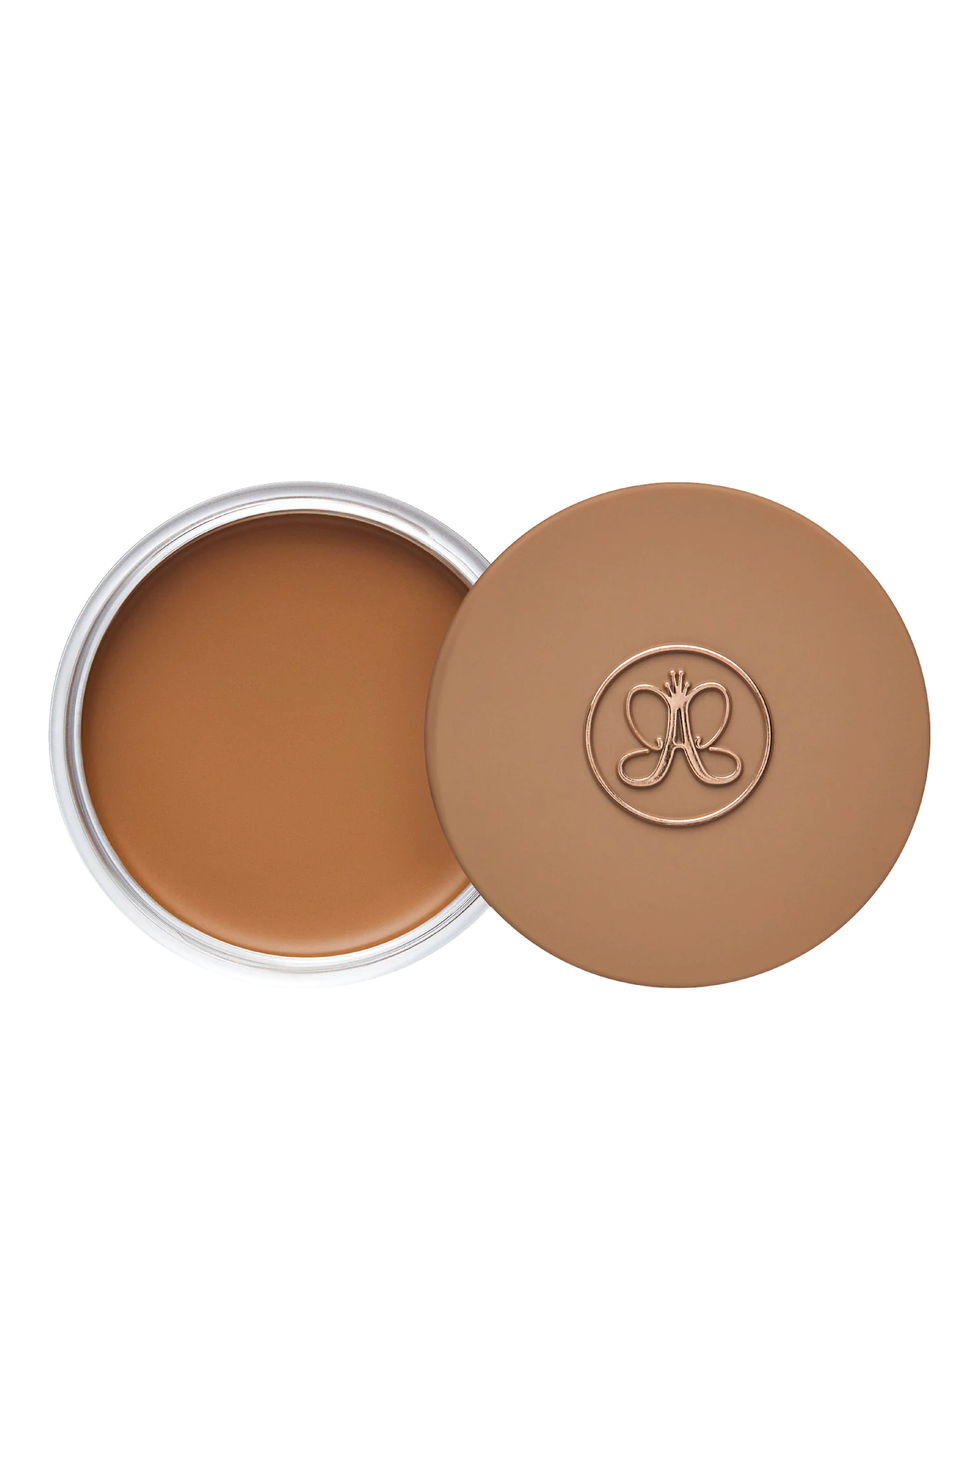 19 Best Cream Bronzers of 2023 for Every Skin Tone - How To Pick the Right  Bronzer Color